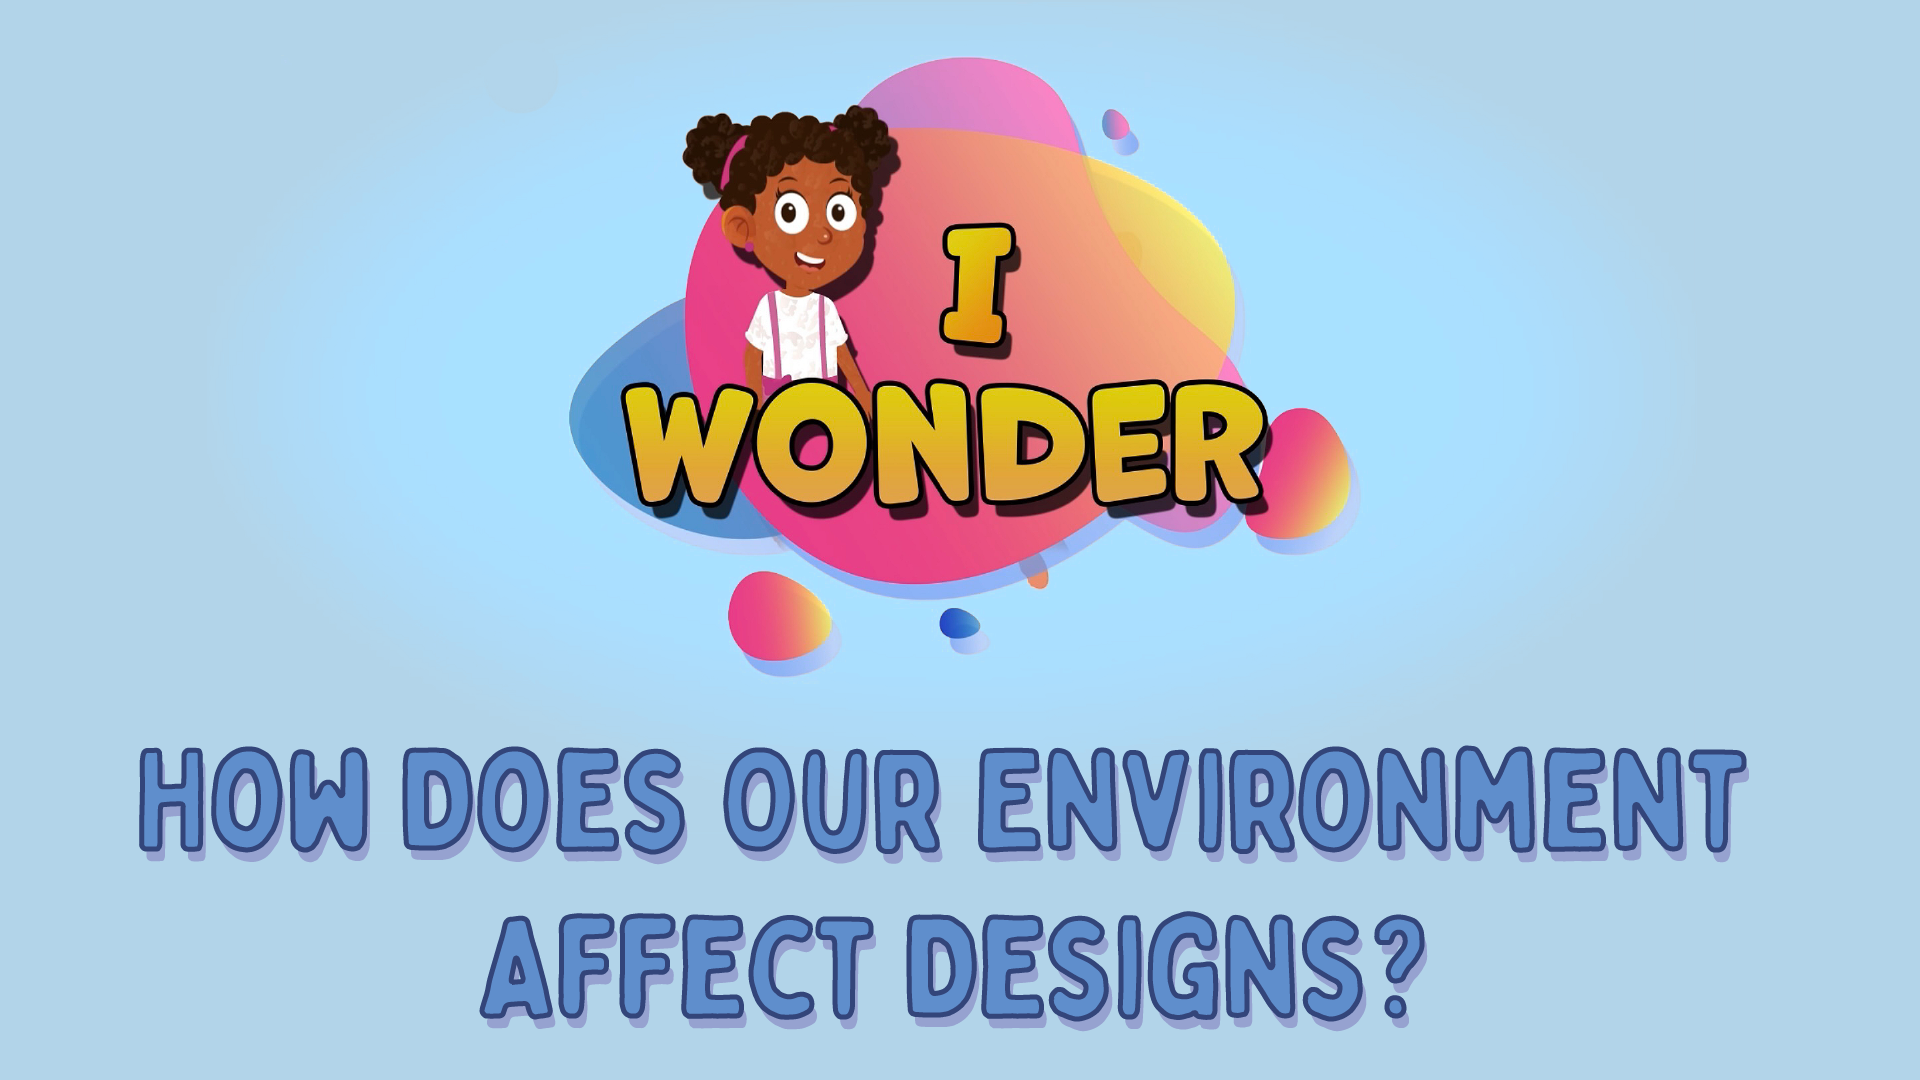 How Does Our Environment Affect Designs?